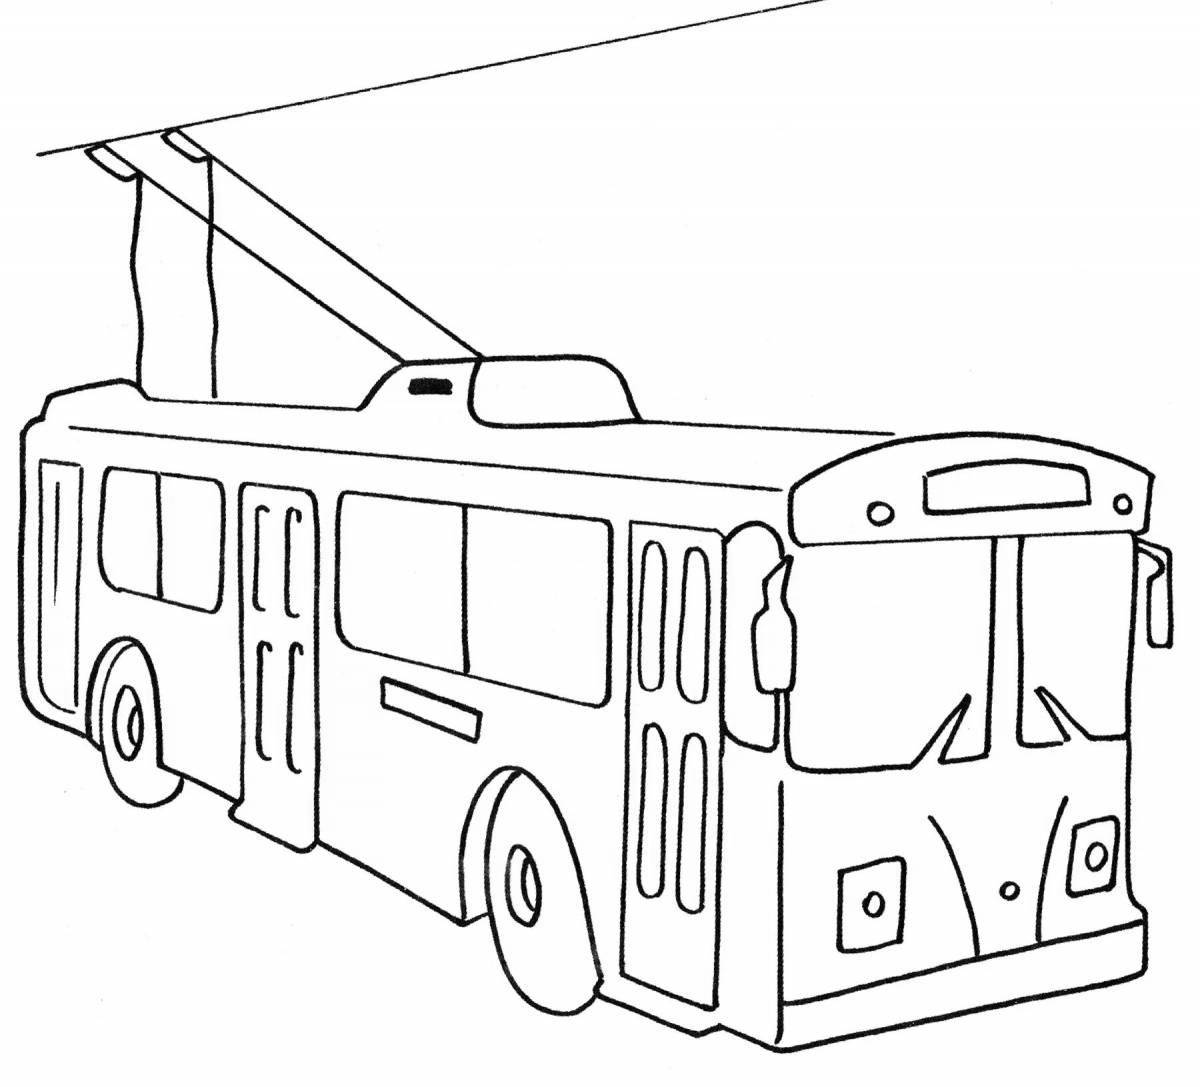 Charming public transport coloring book